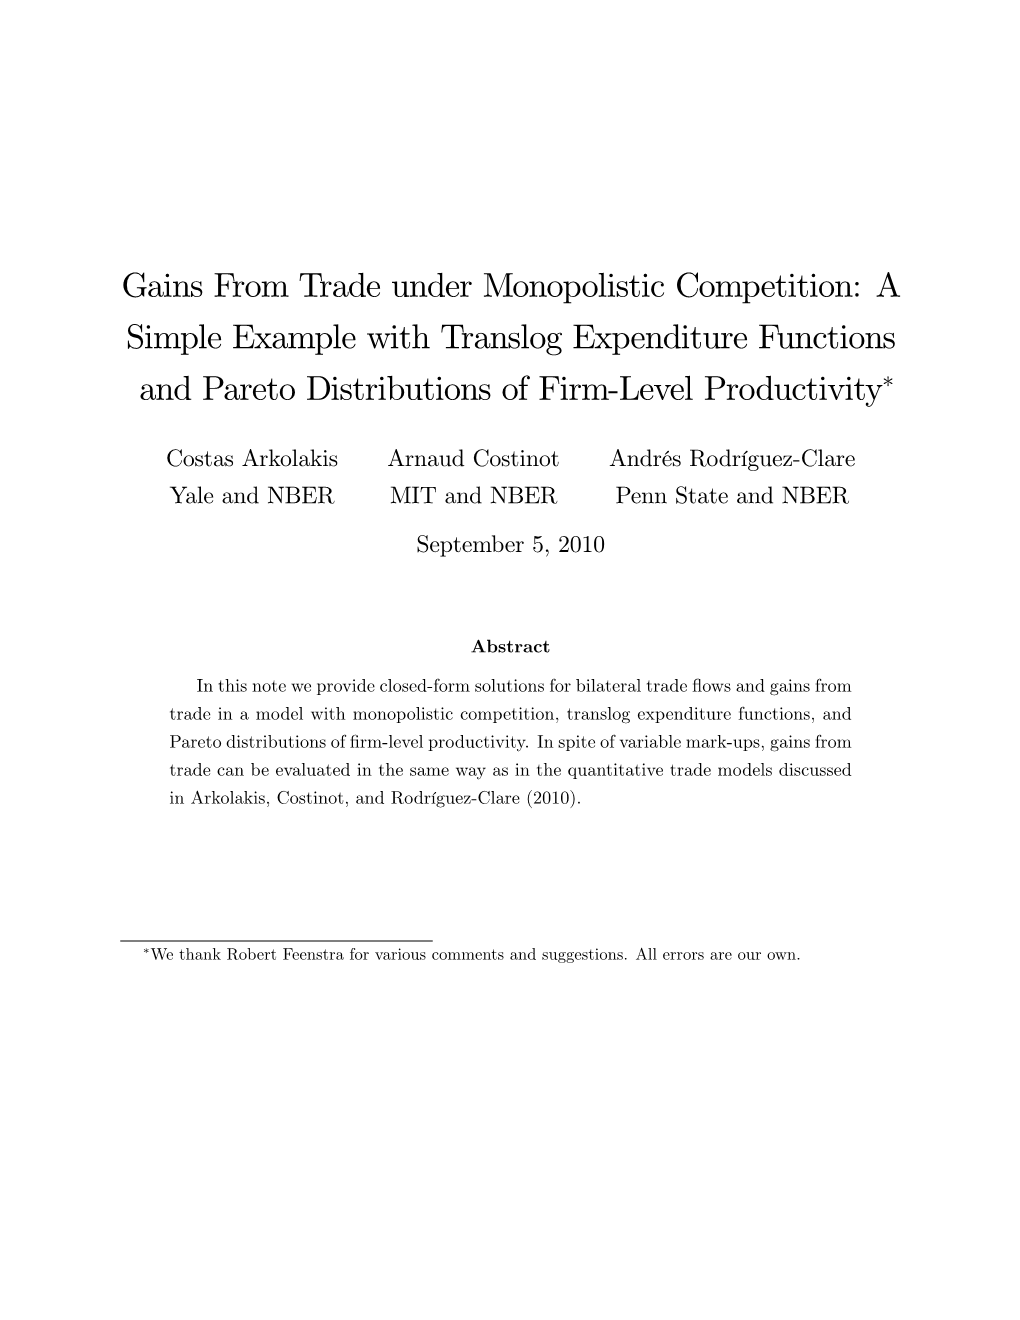 Gains from Trade Under Monopolistic Competition: a Simple Example with Translog Expenditure Functions